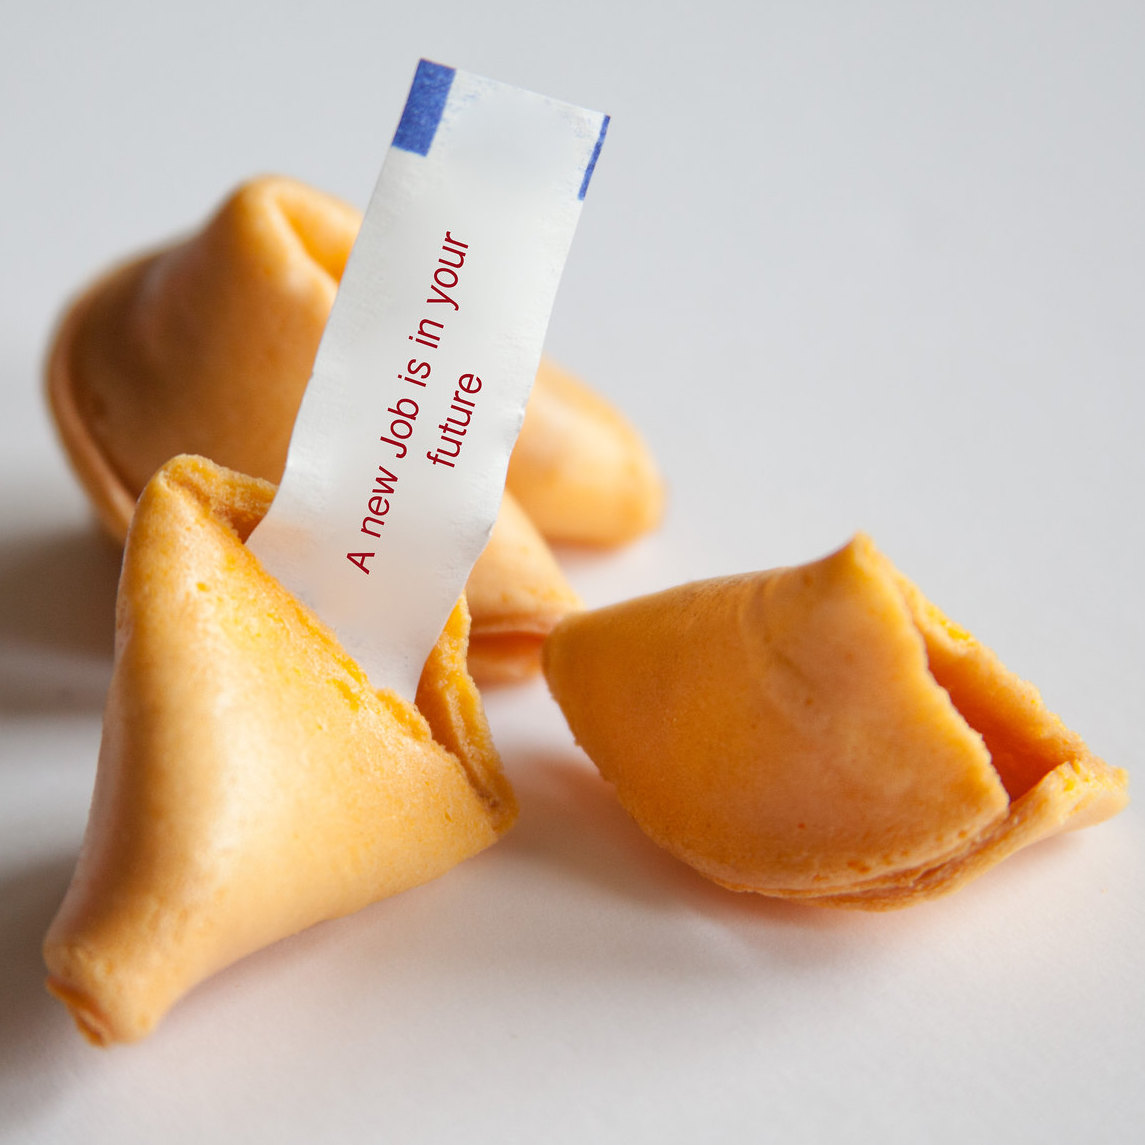 Fortune Cookies: A new job is in your future